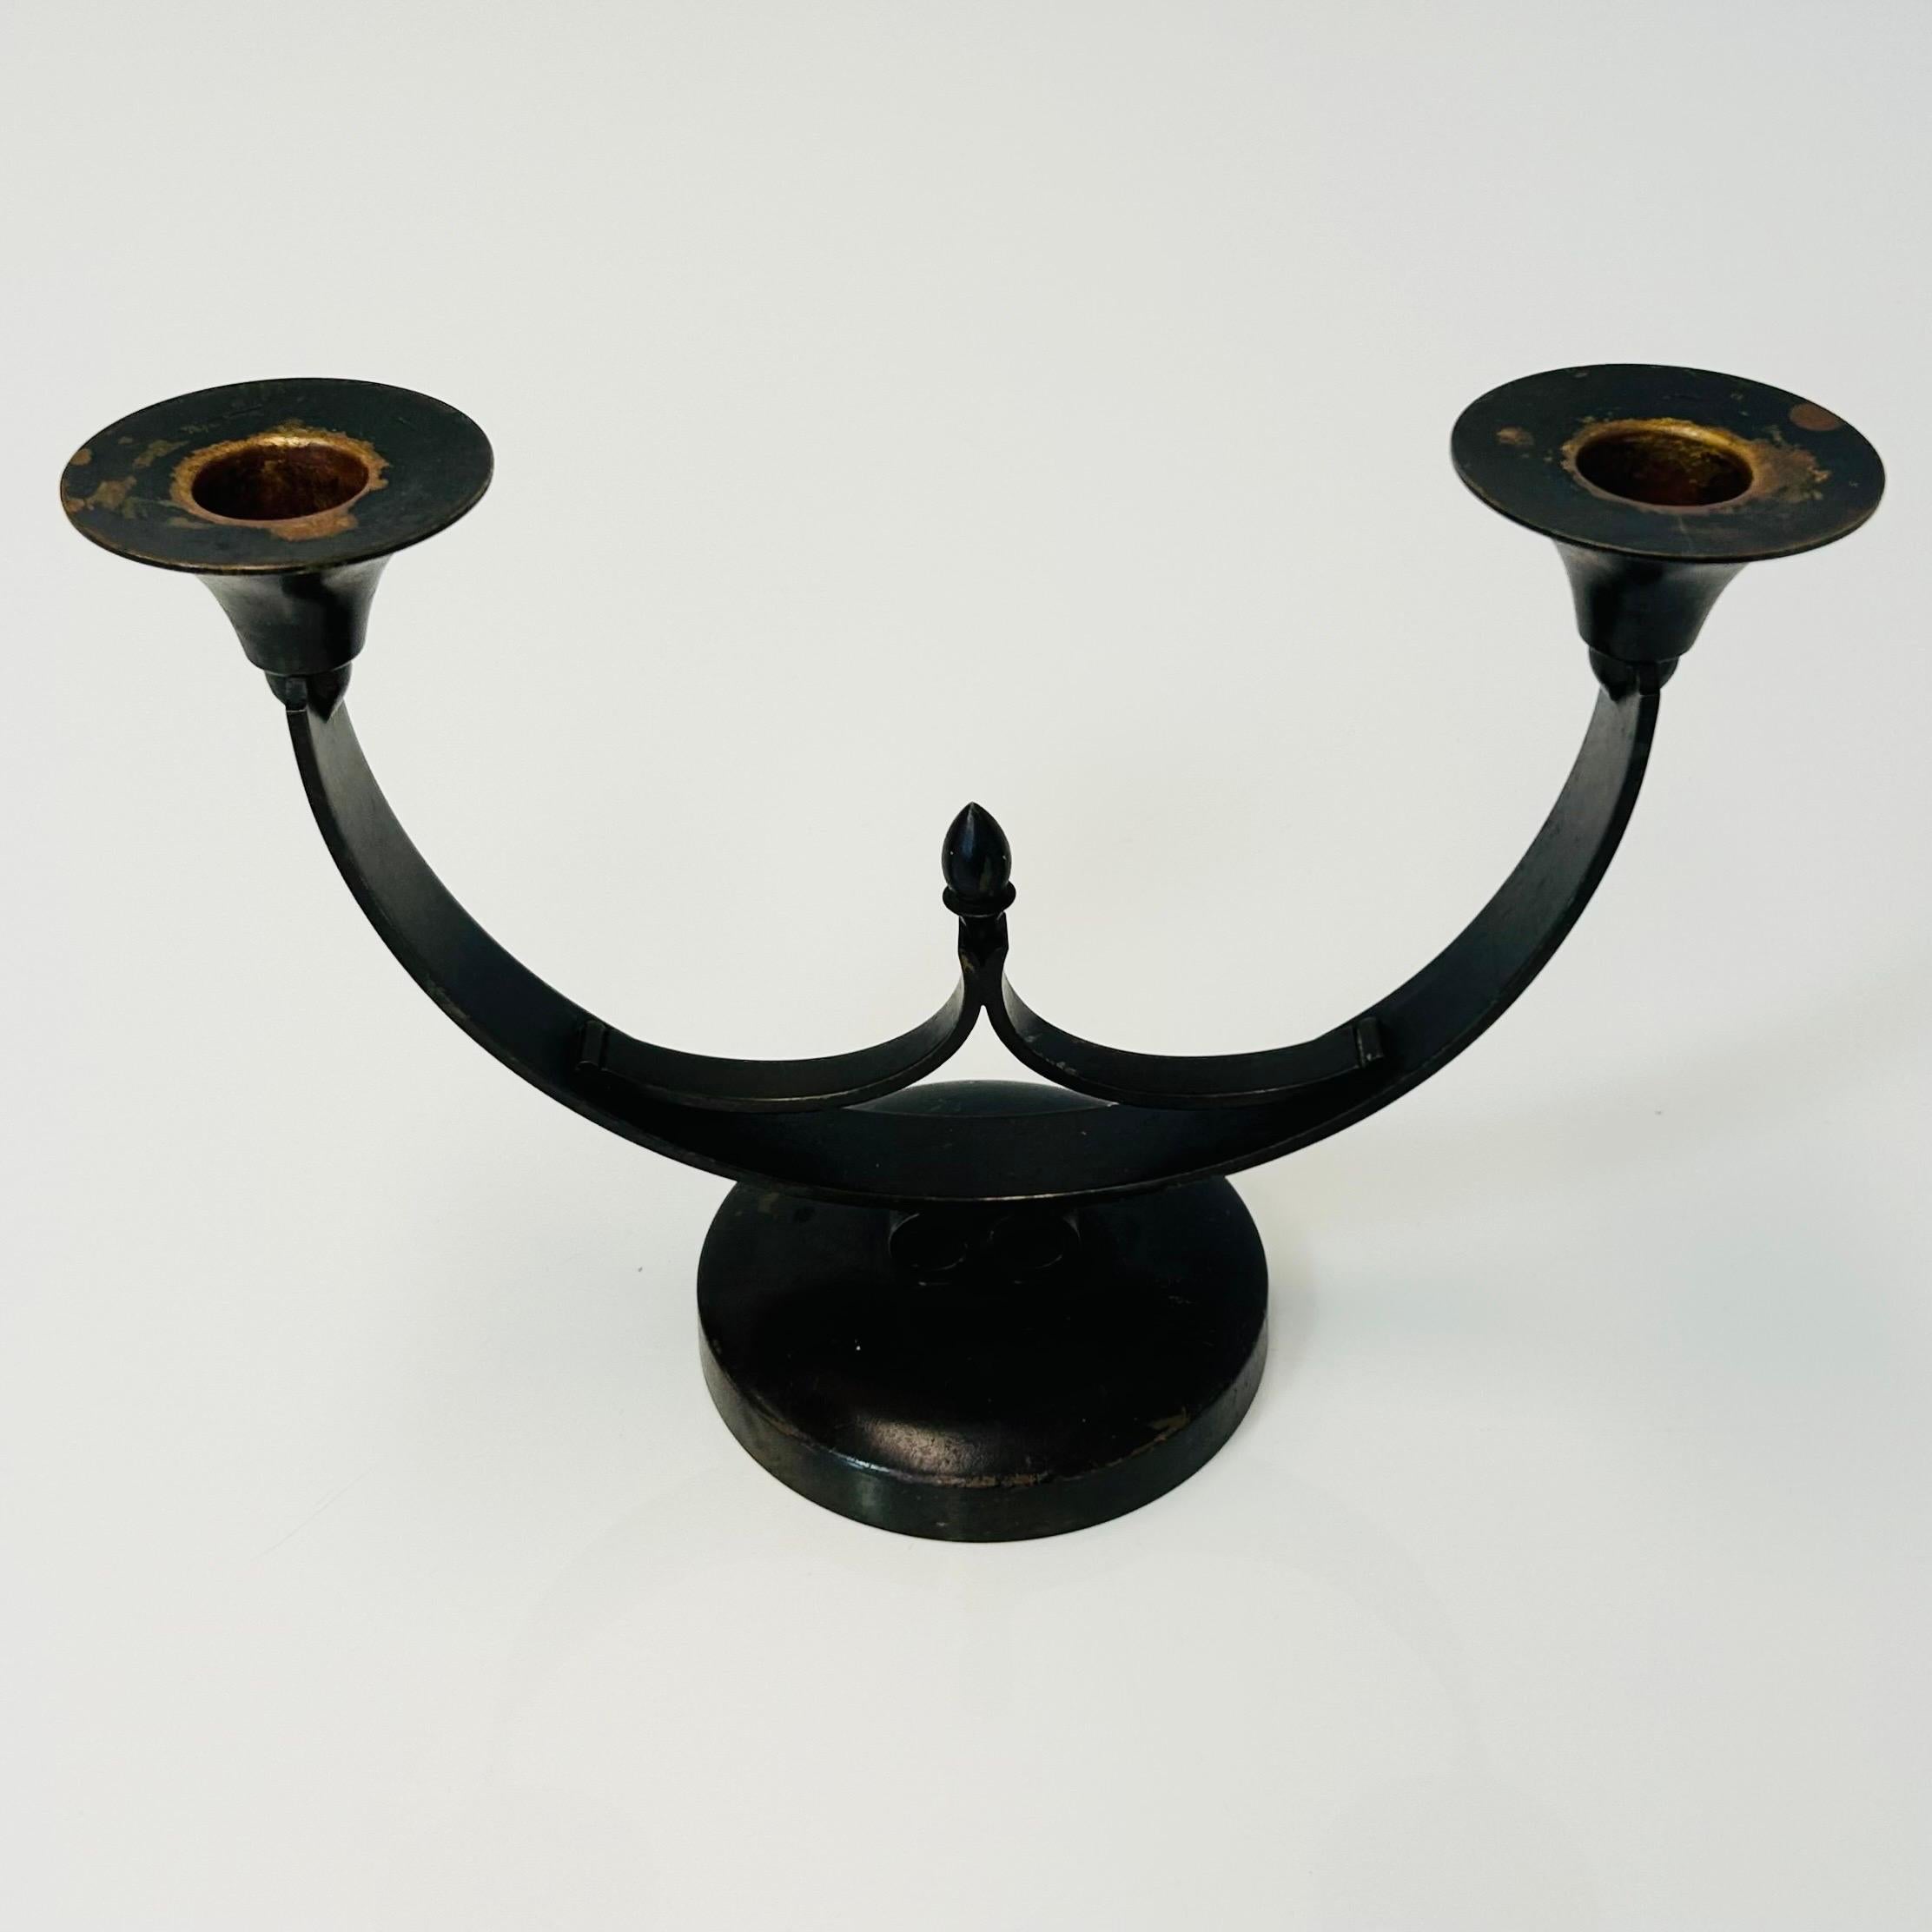 Pair of Light Bronze Candle Holders by Just Andersen, 1930s, Denmark For Sale 4